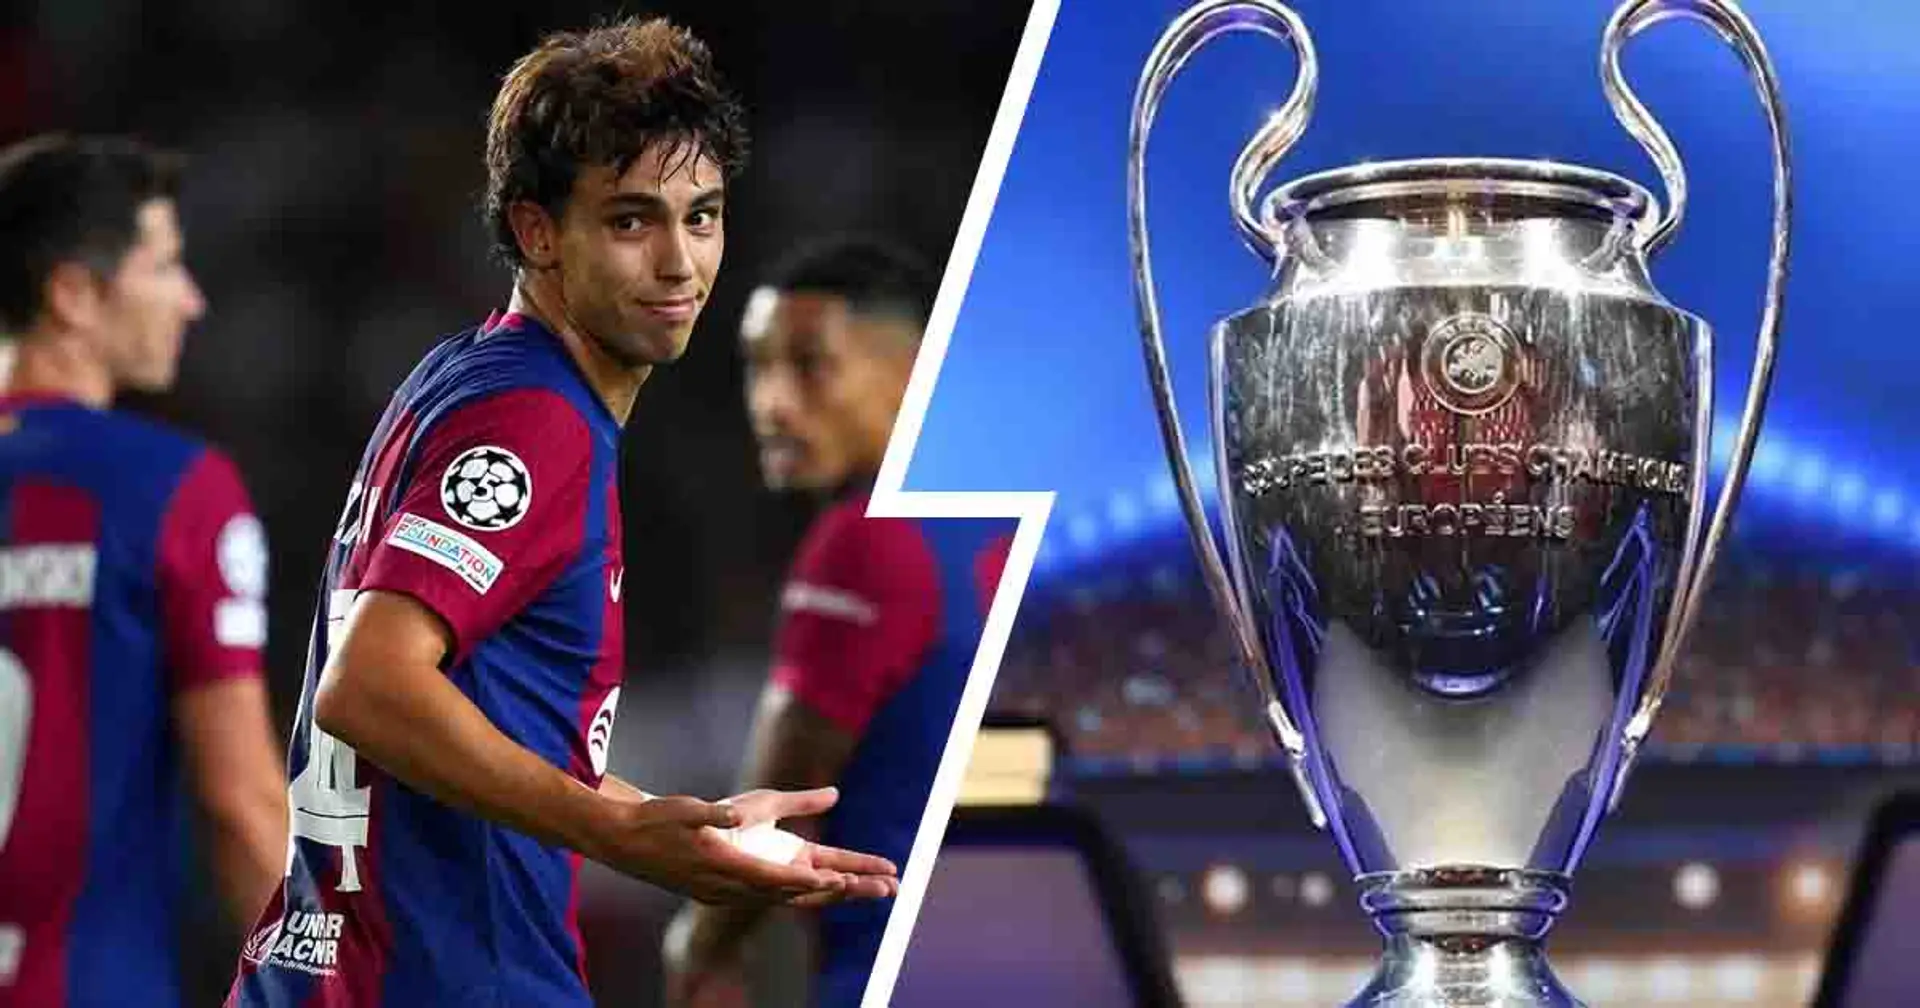 Revealed: how much money Barca could earn by making it past Champions League group stages